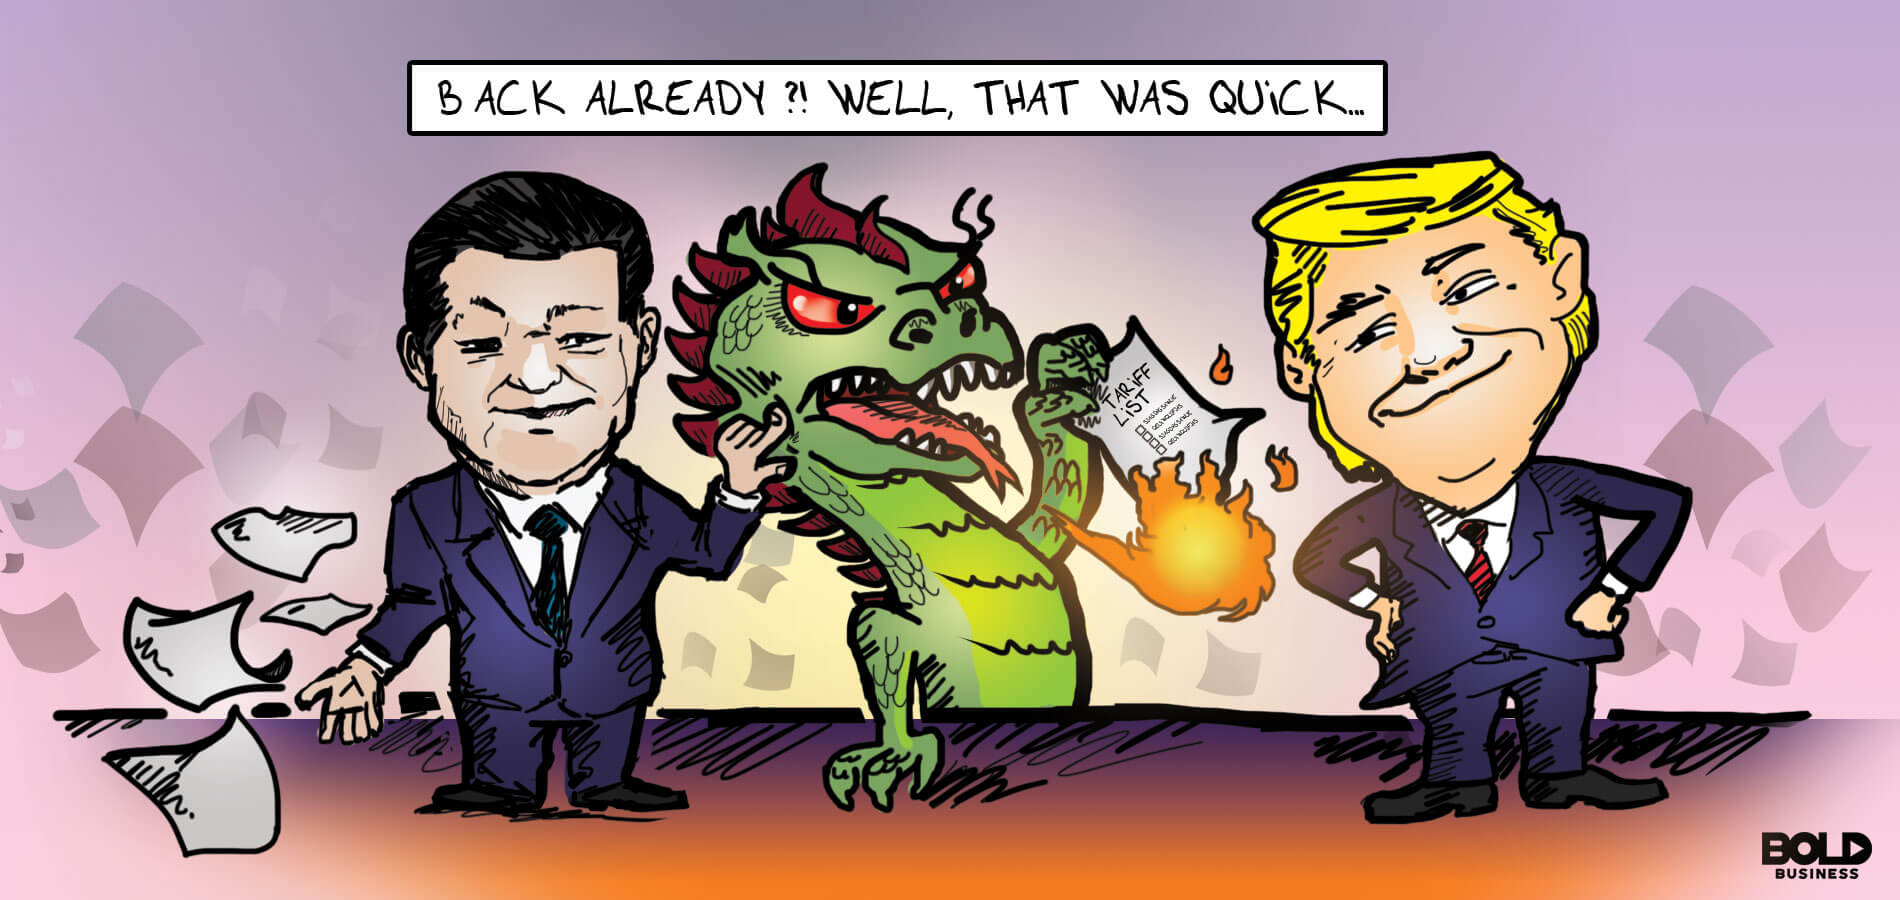 cartoon of a dragon burning a paper containing the tariff list while standing between Xi Jinping and Donald Trump, depcting the fact that the China oil import from the U.S. resumed after the tax policy change